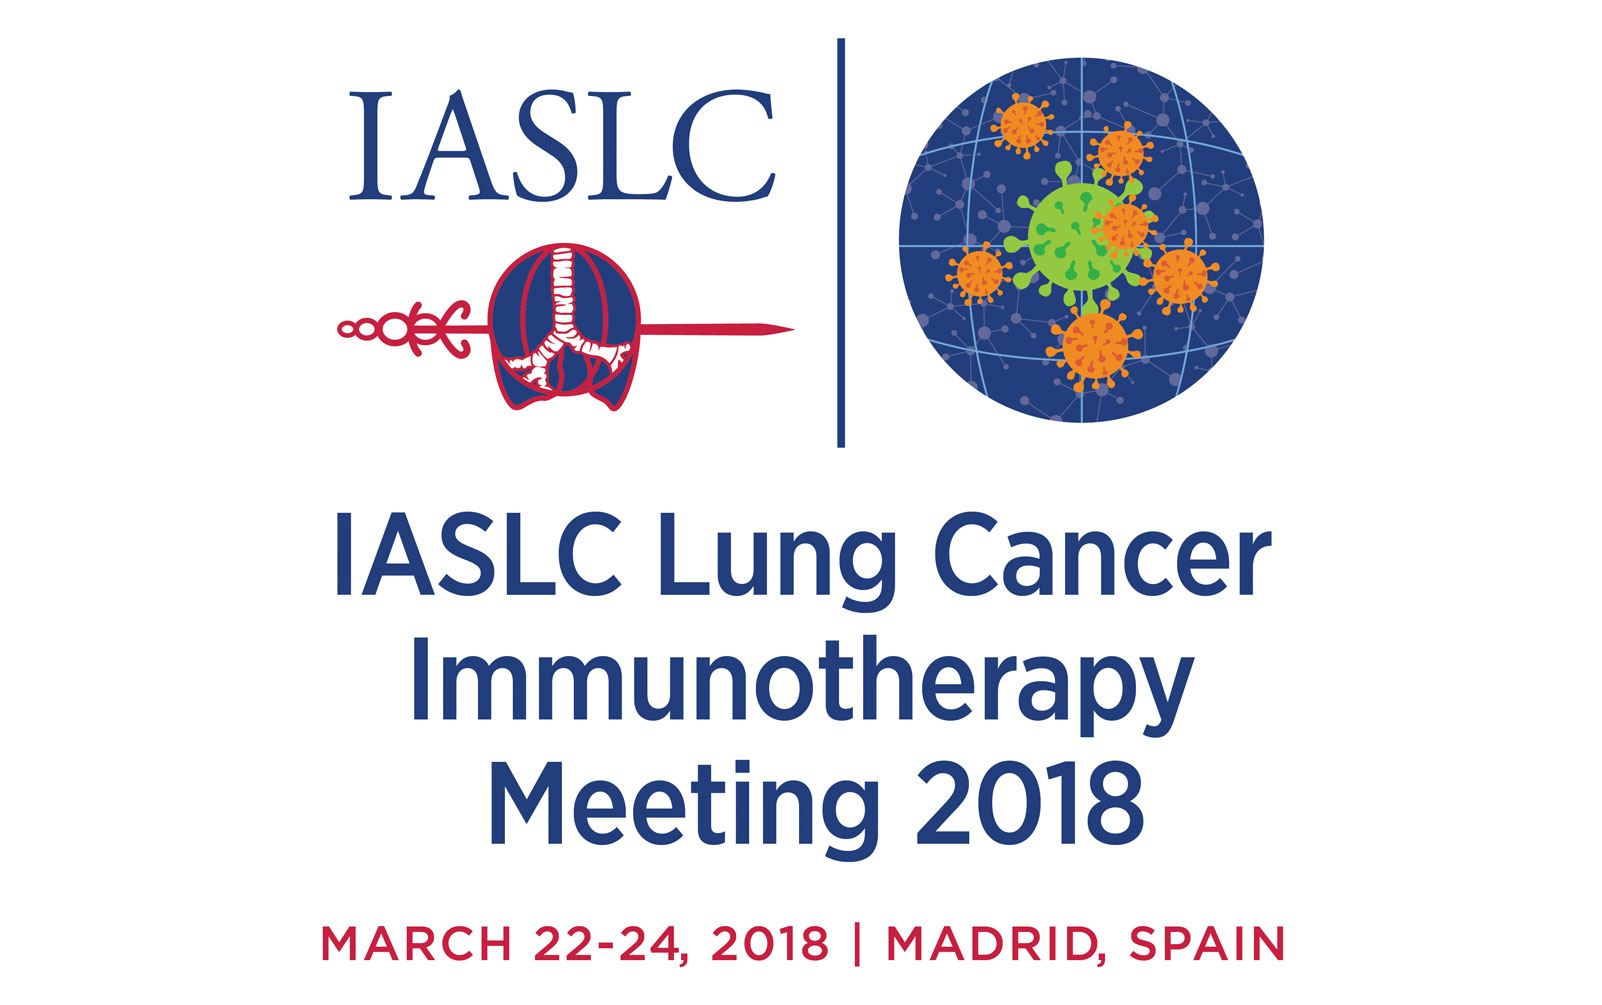 Lung Cancer Immunotherapy Meeting to Discuss New Topics, Emerging Themes